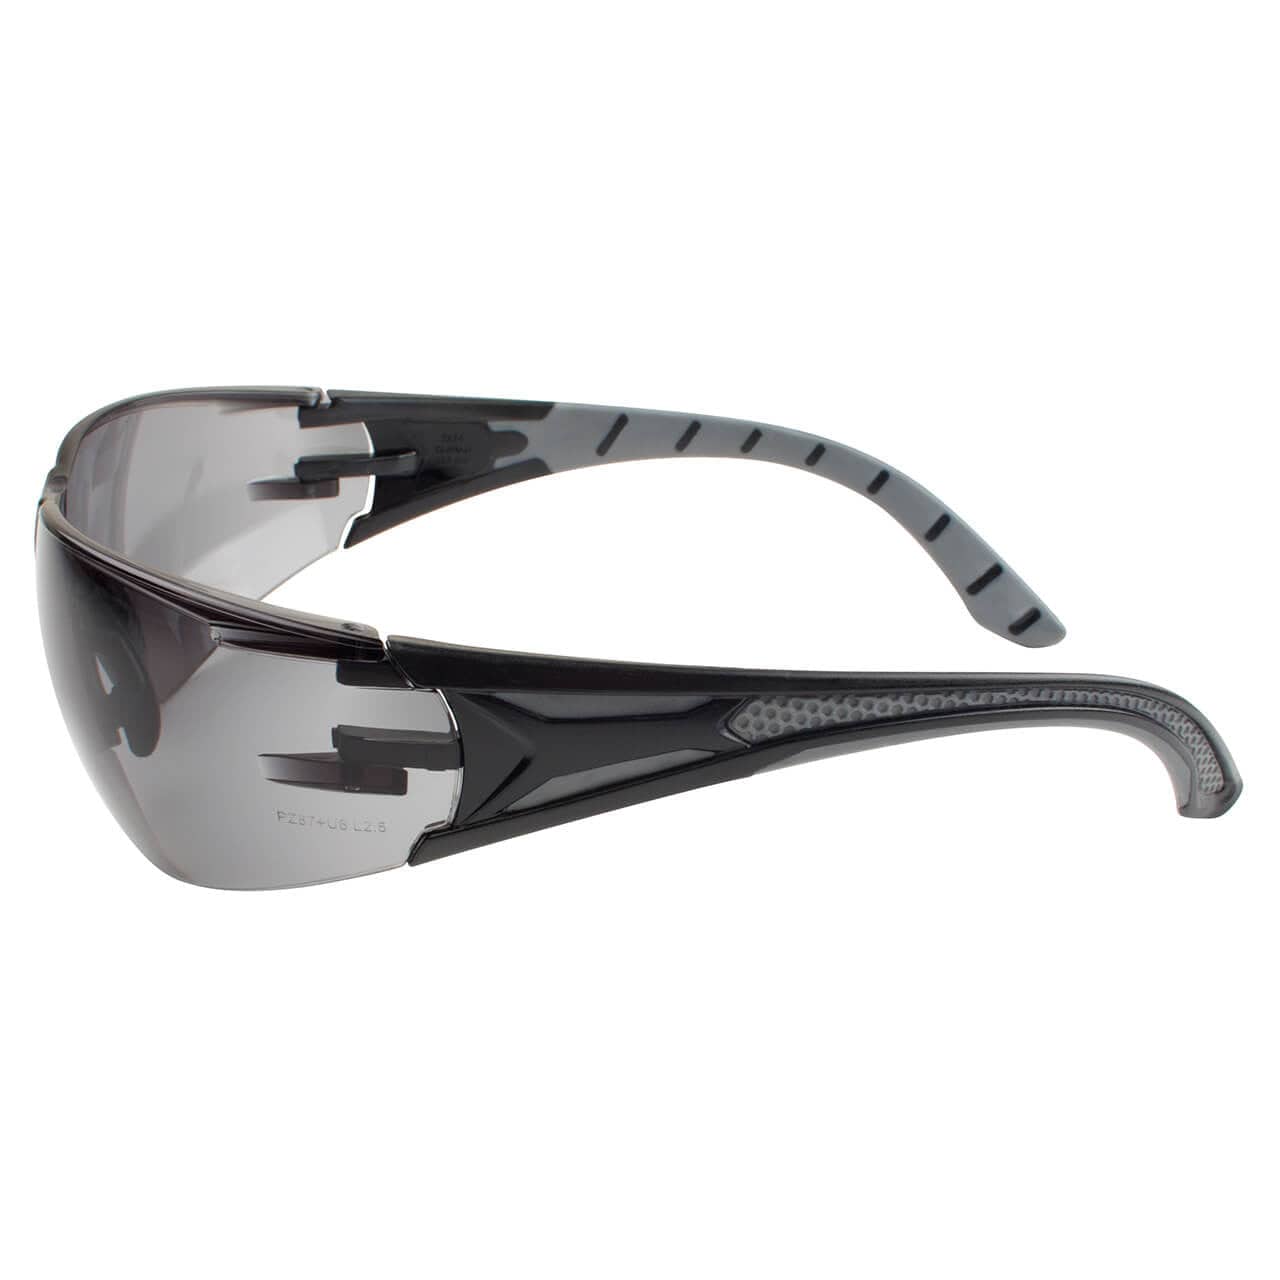 Metel M50 Safety Glasses Lightweight, Flexible Temples, Soft Nose, Multiple Lens Options - Clear Anti-Fog